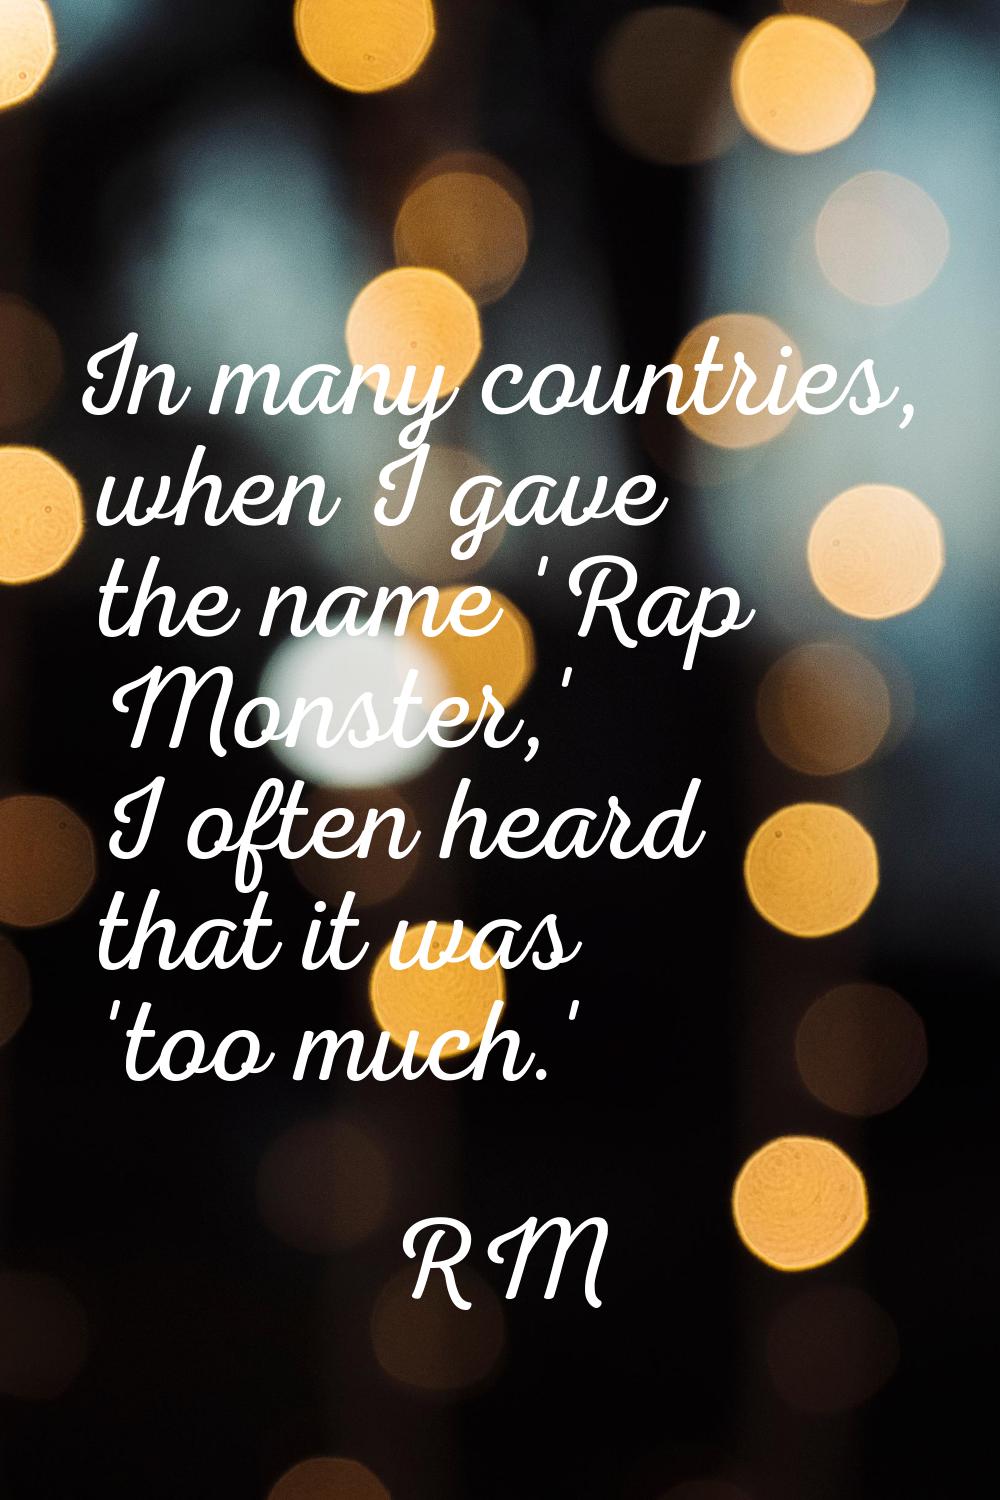 In many countries, when I gave the name 'Rap Monster,' I often heard that it was 'too much.'